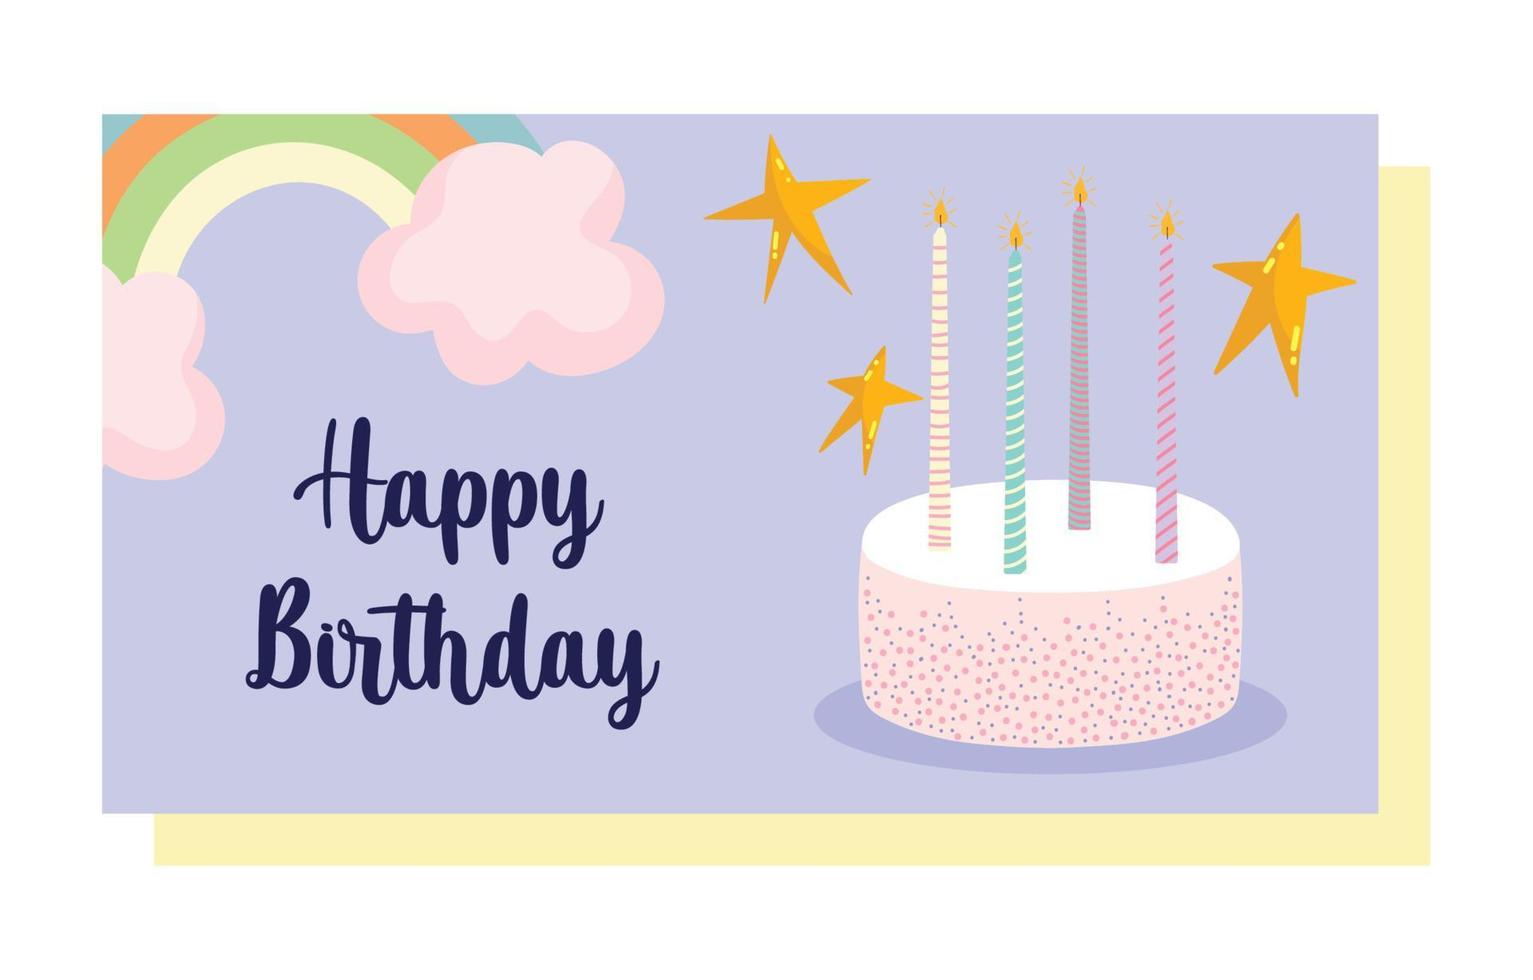 happy birthday, sweet cake with candles and rainbow cartoon celebration decoration card vector